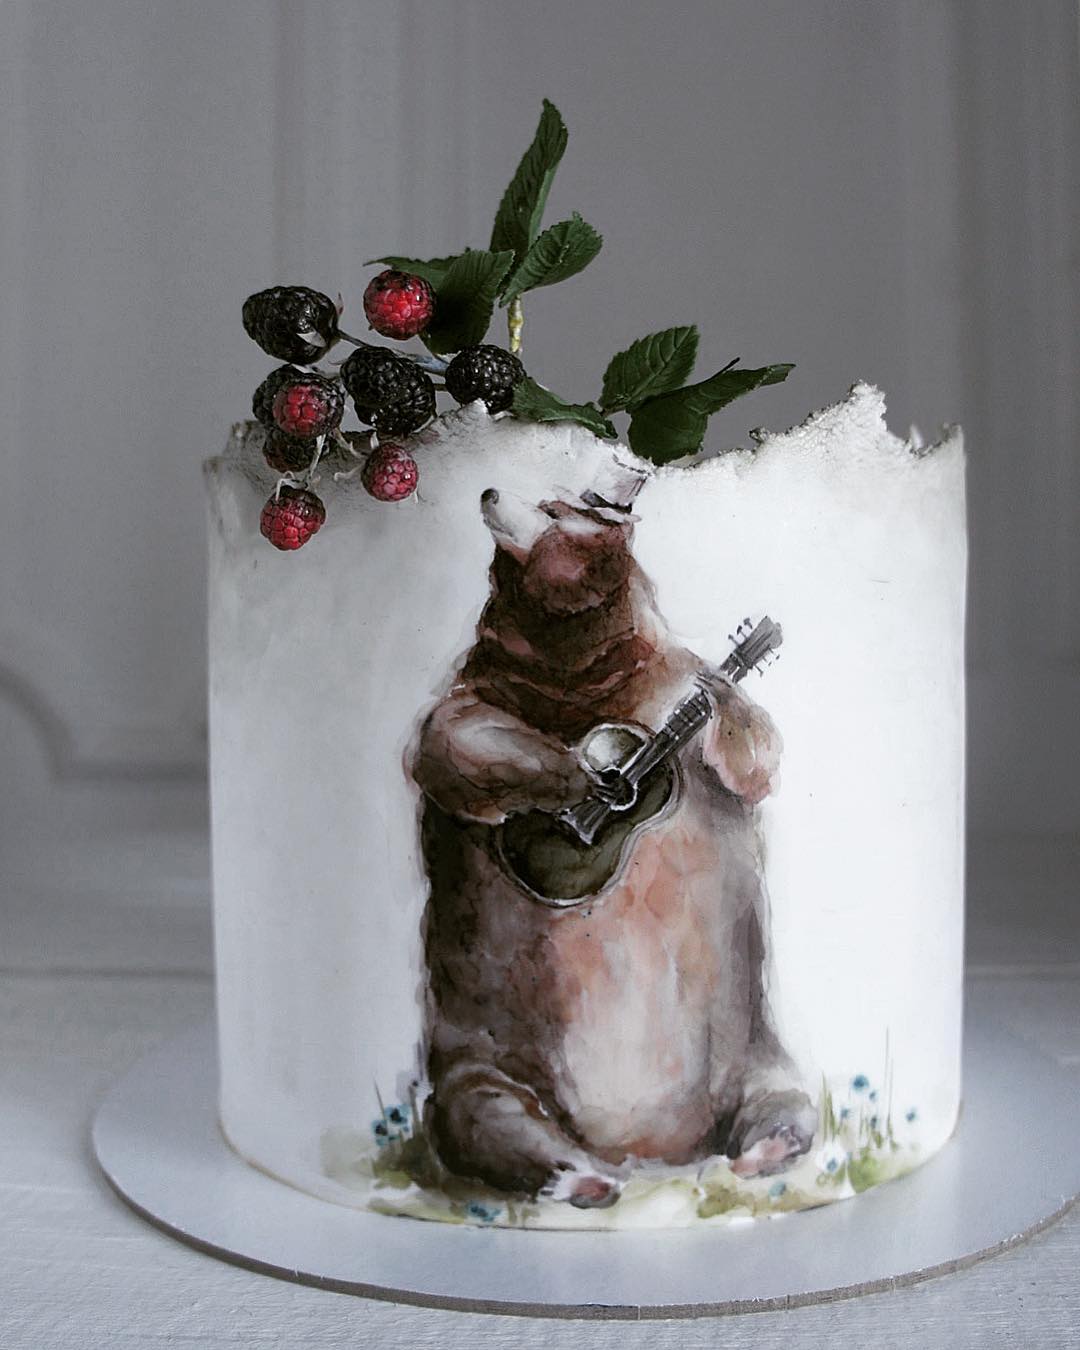 cake with a bear playing guitar